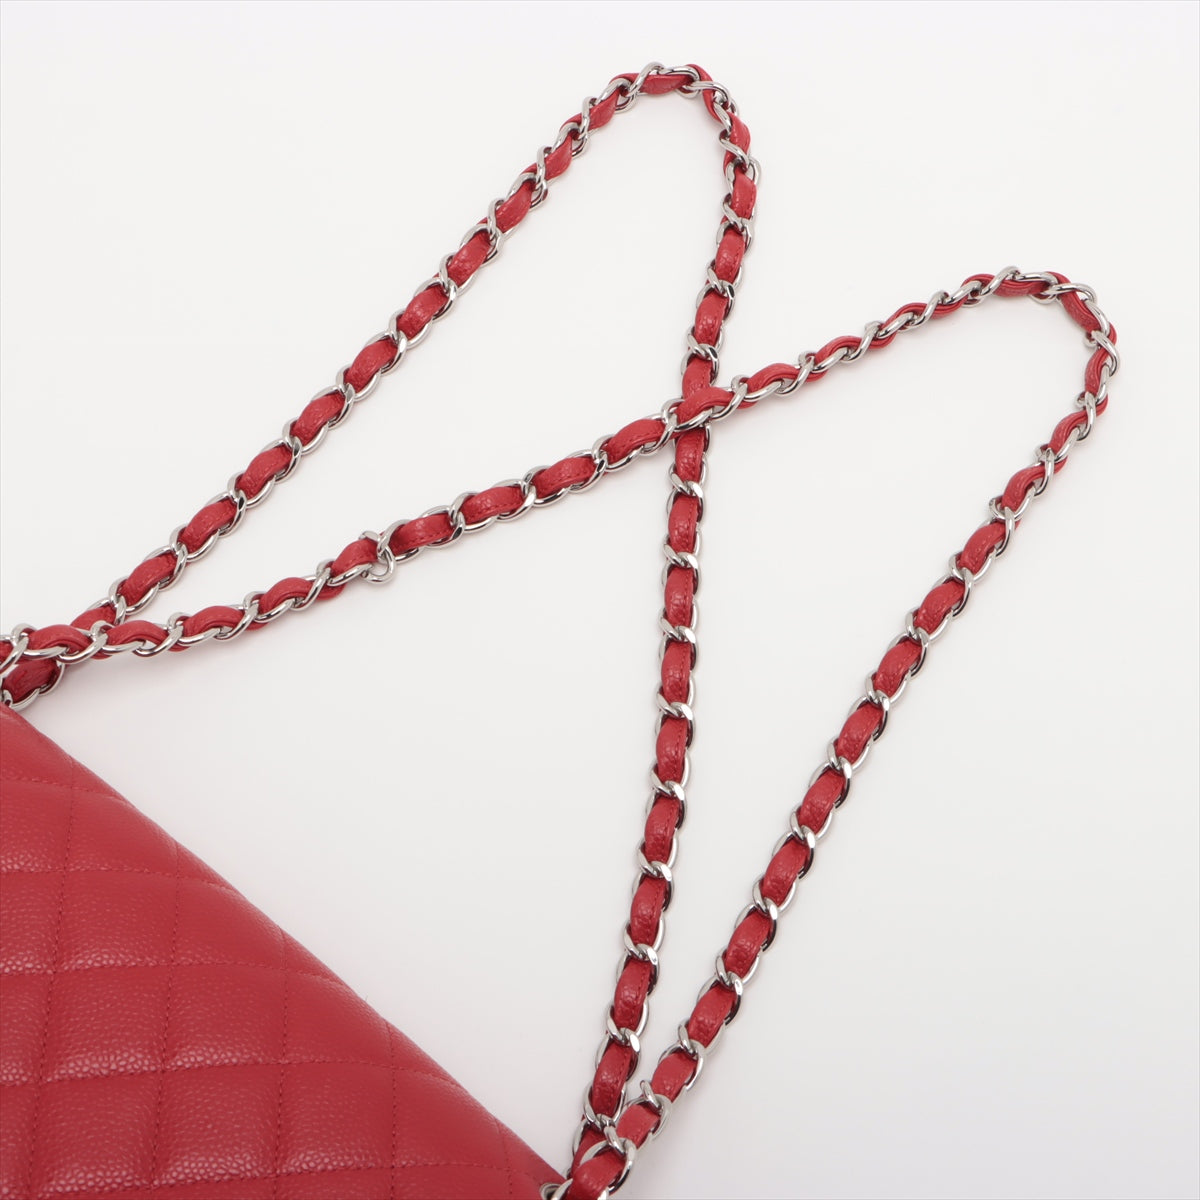 Chanel Big Matelasse Caviarskin Double flap Double chain bag Red Silver Metal fittings 19XXXXXX